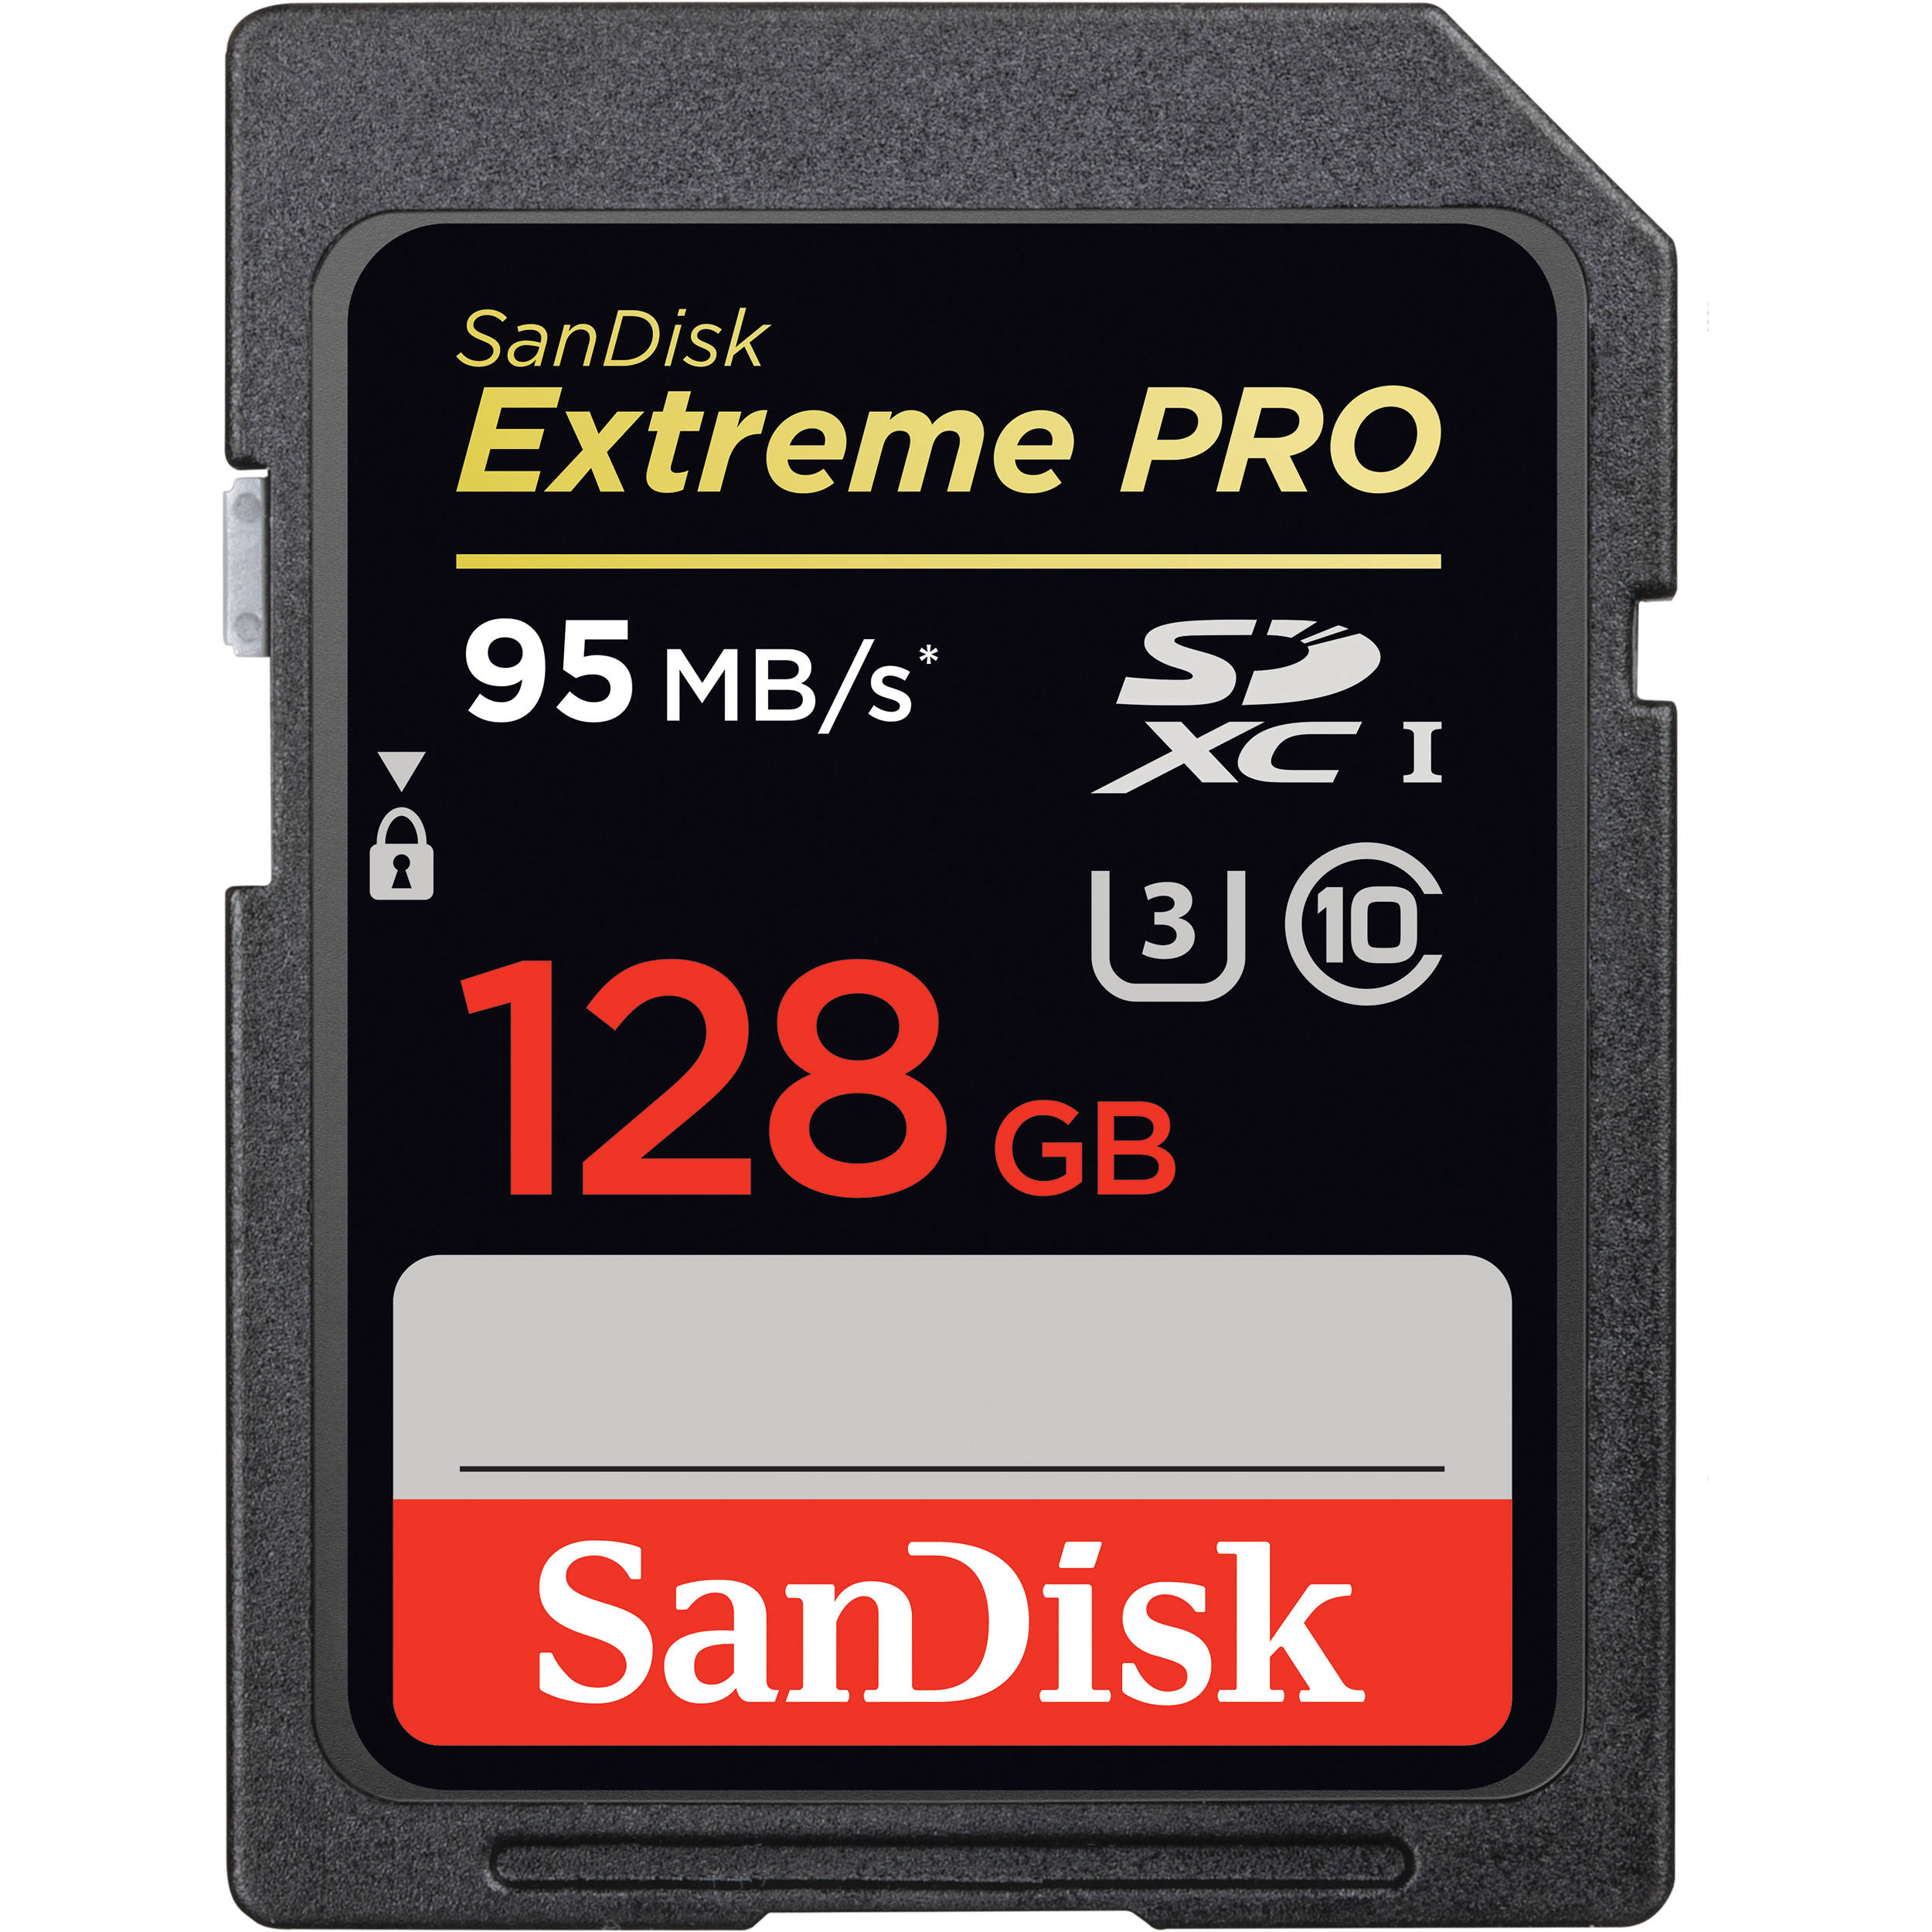 SanDisk SD 128GB extreme pro 95 MBs